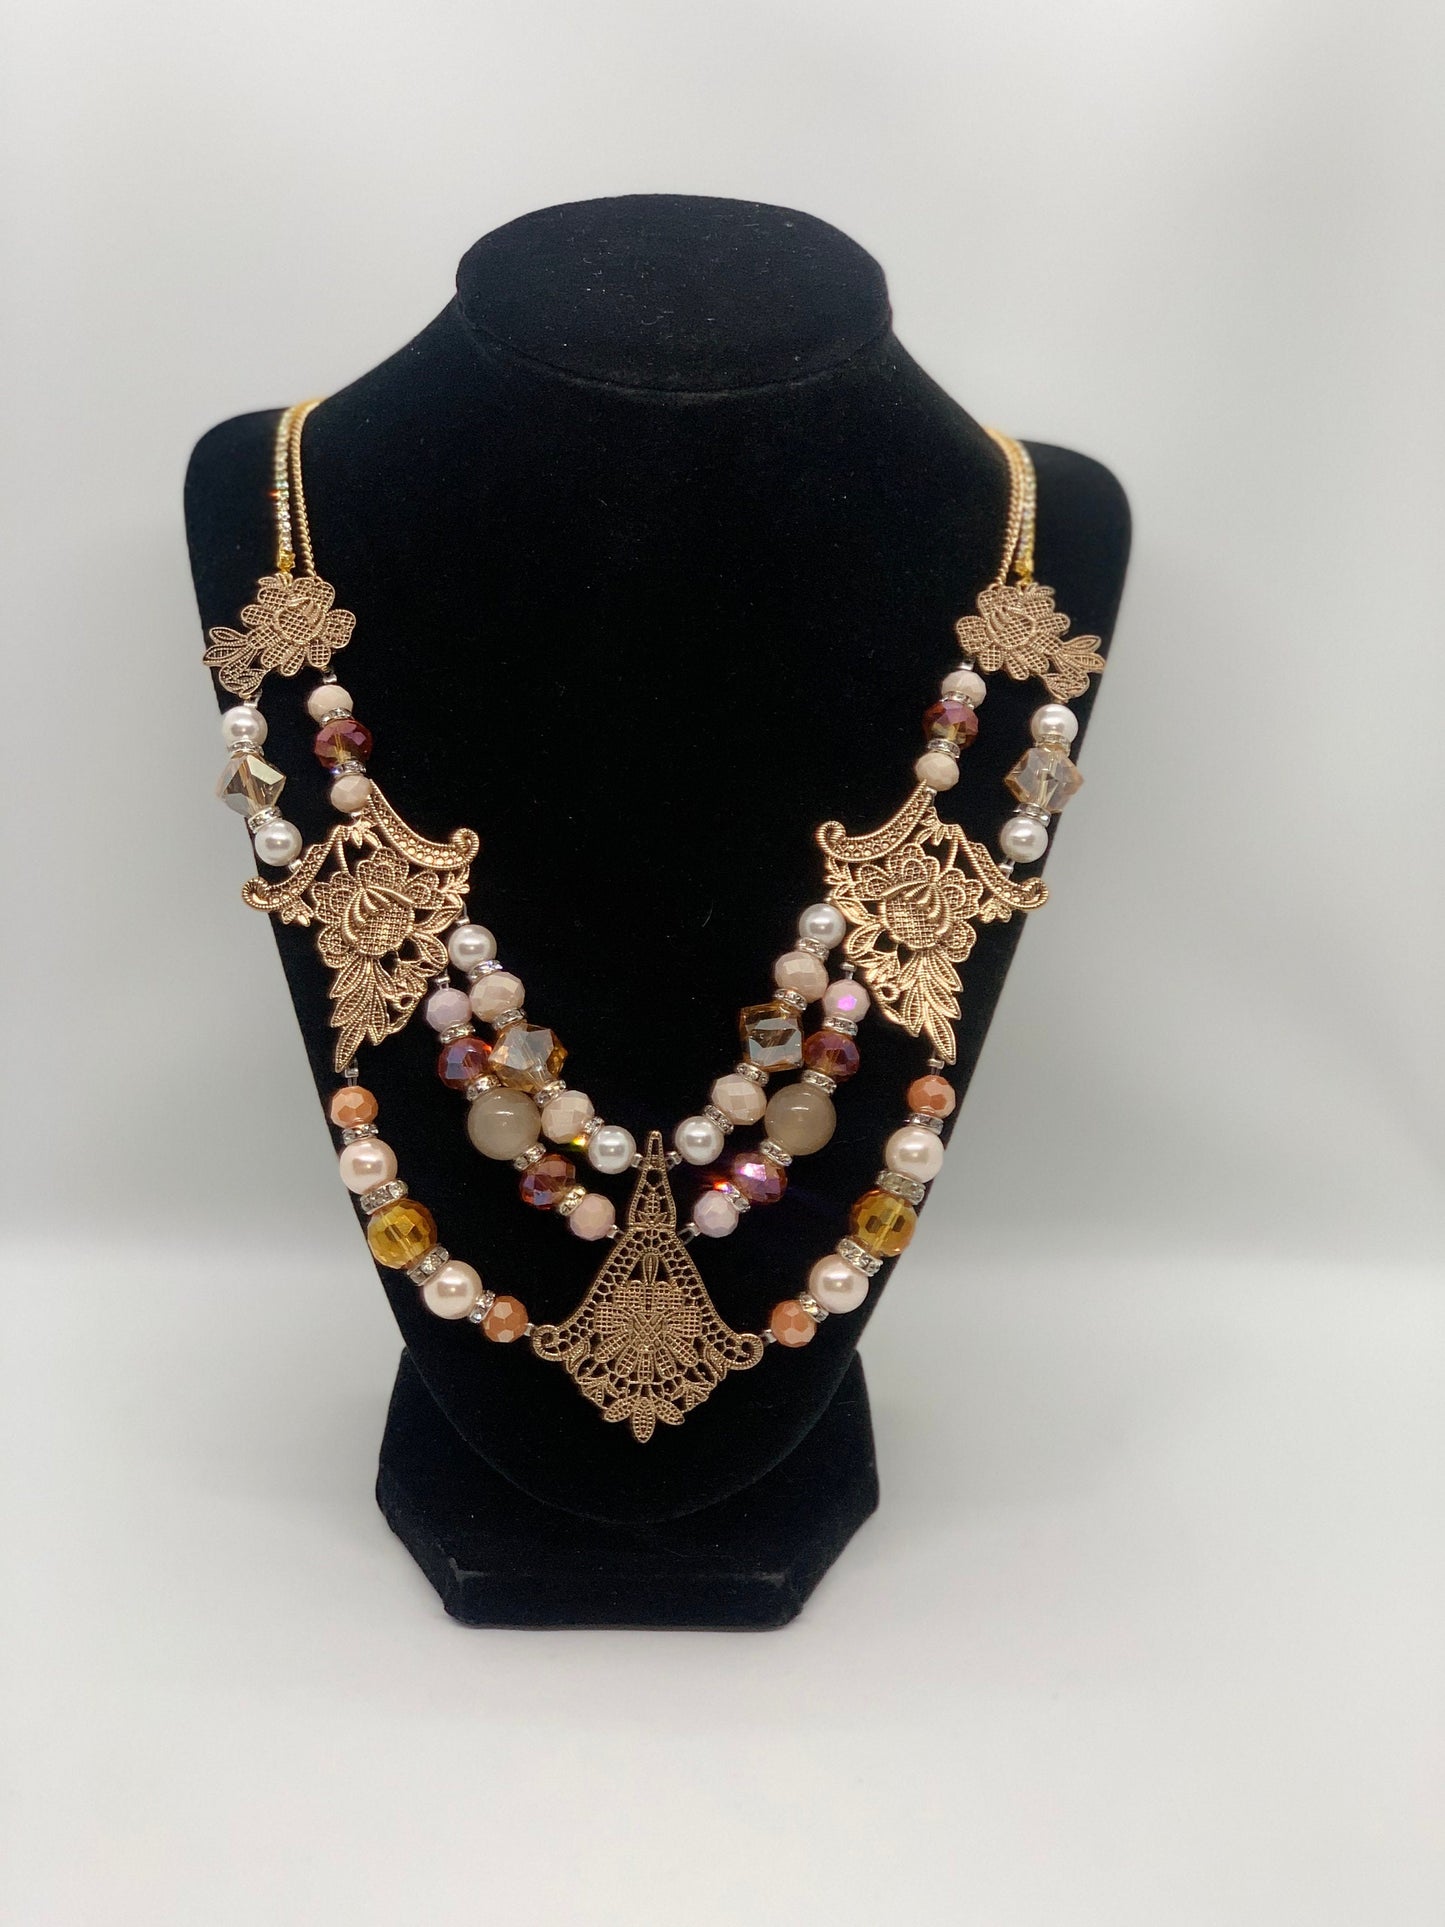 Vintage style necklace with matching earrings-One of Kind-Eleanor